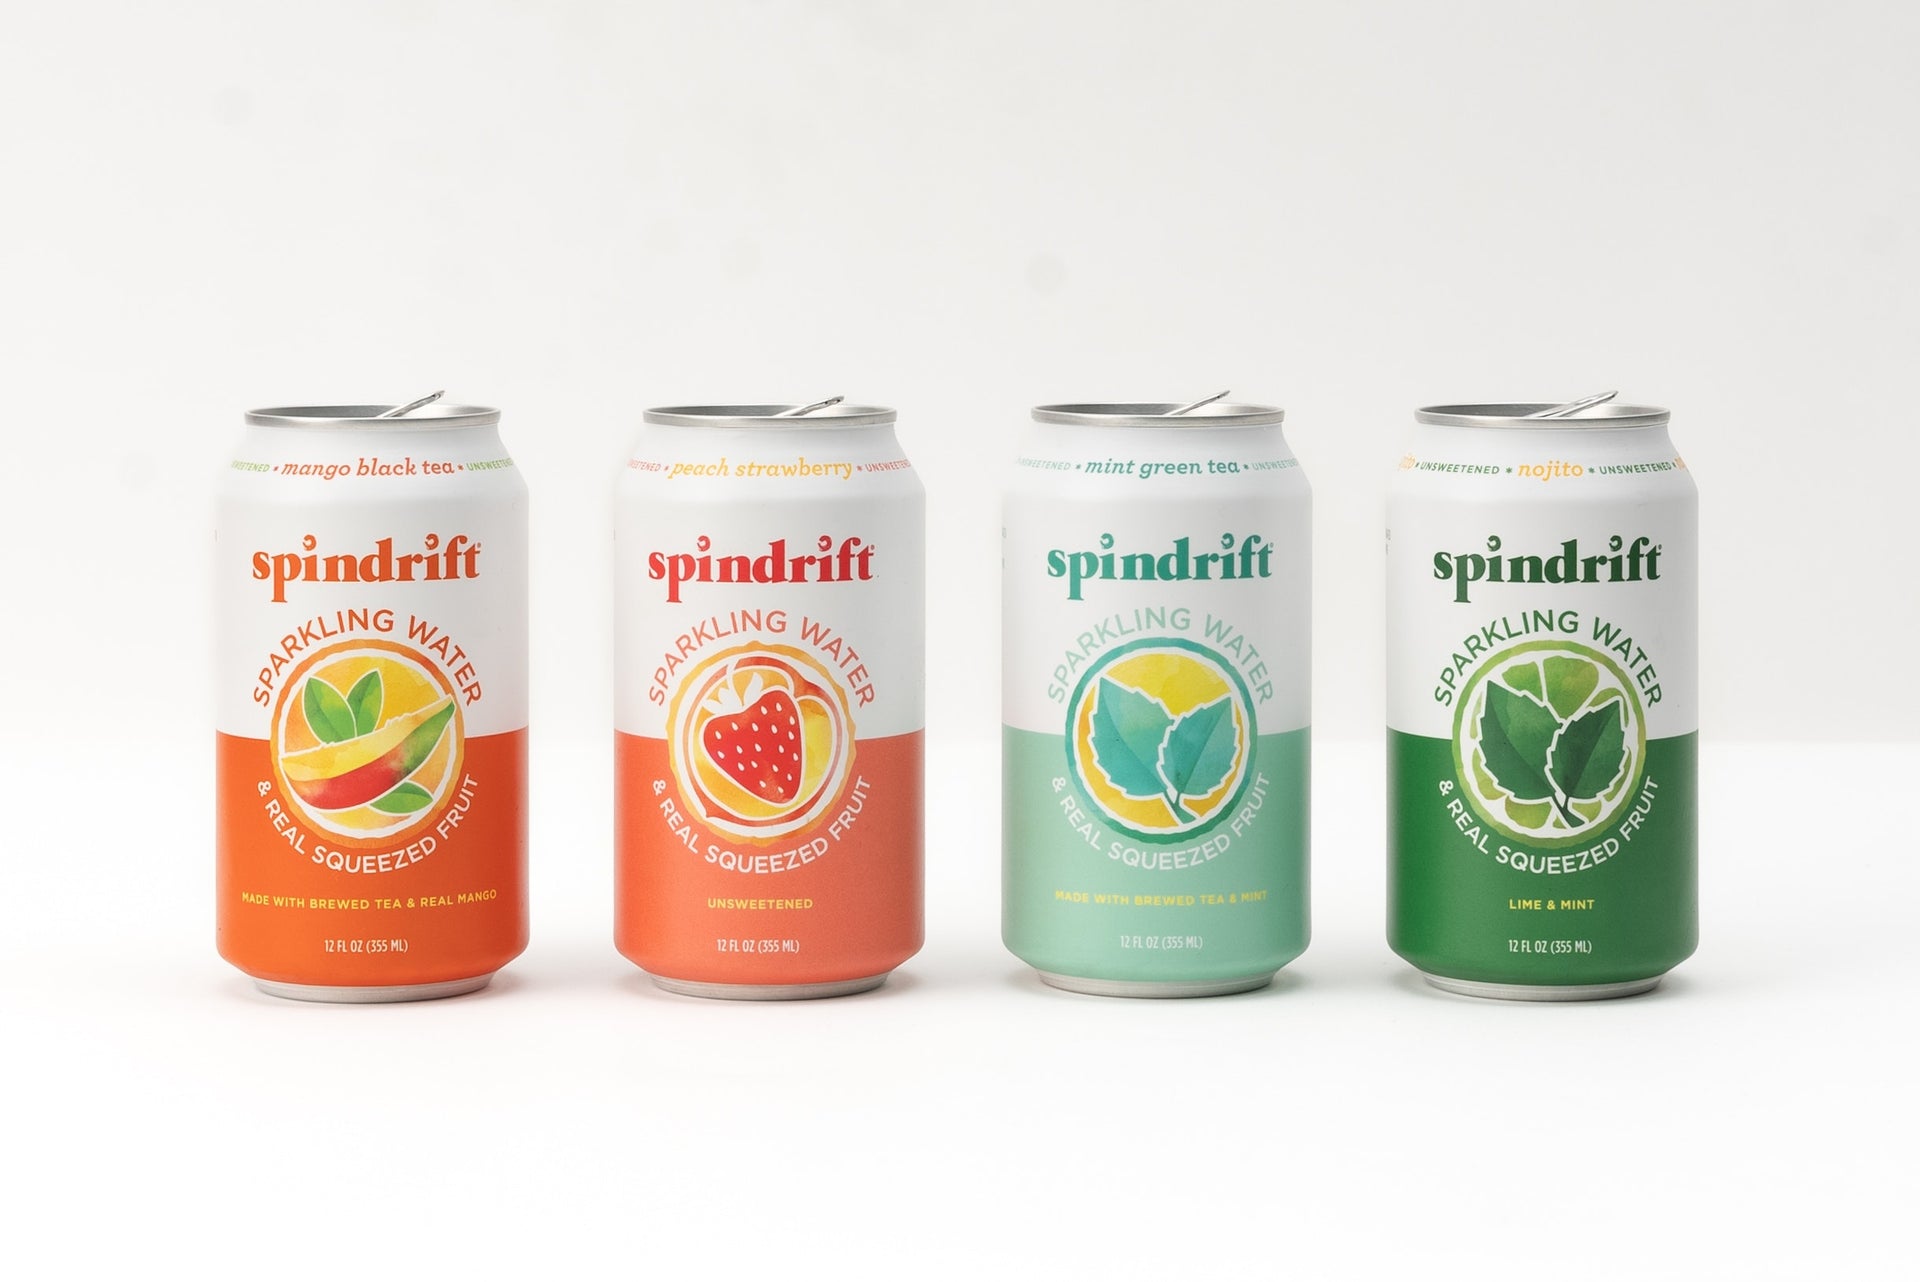 Announcing our new 2023 Spindrift flavors!